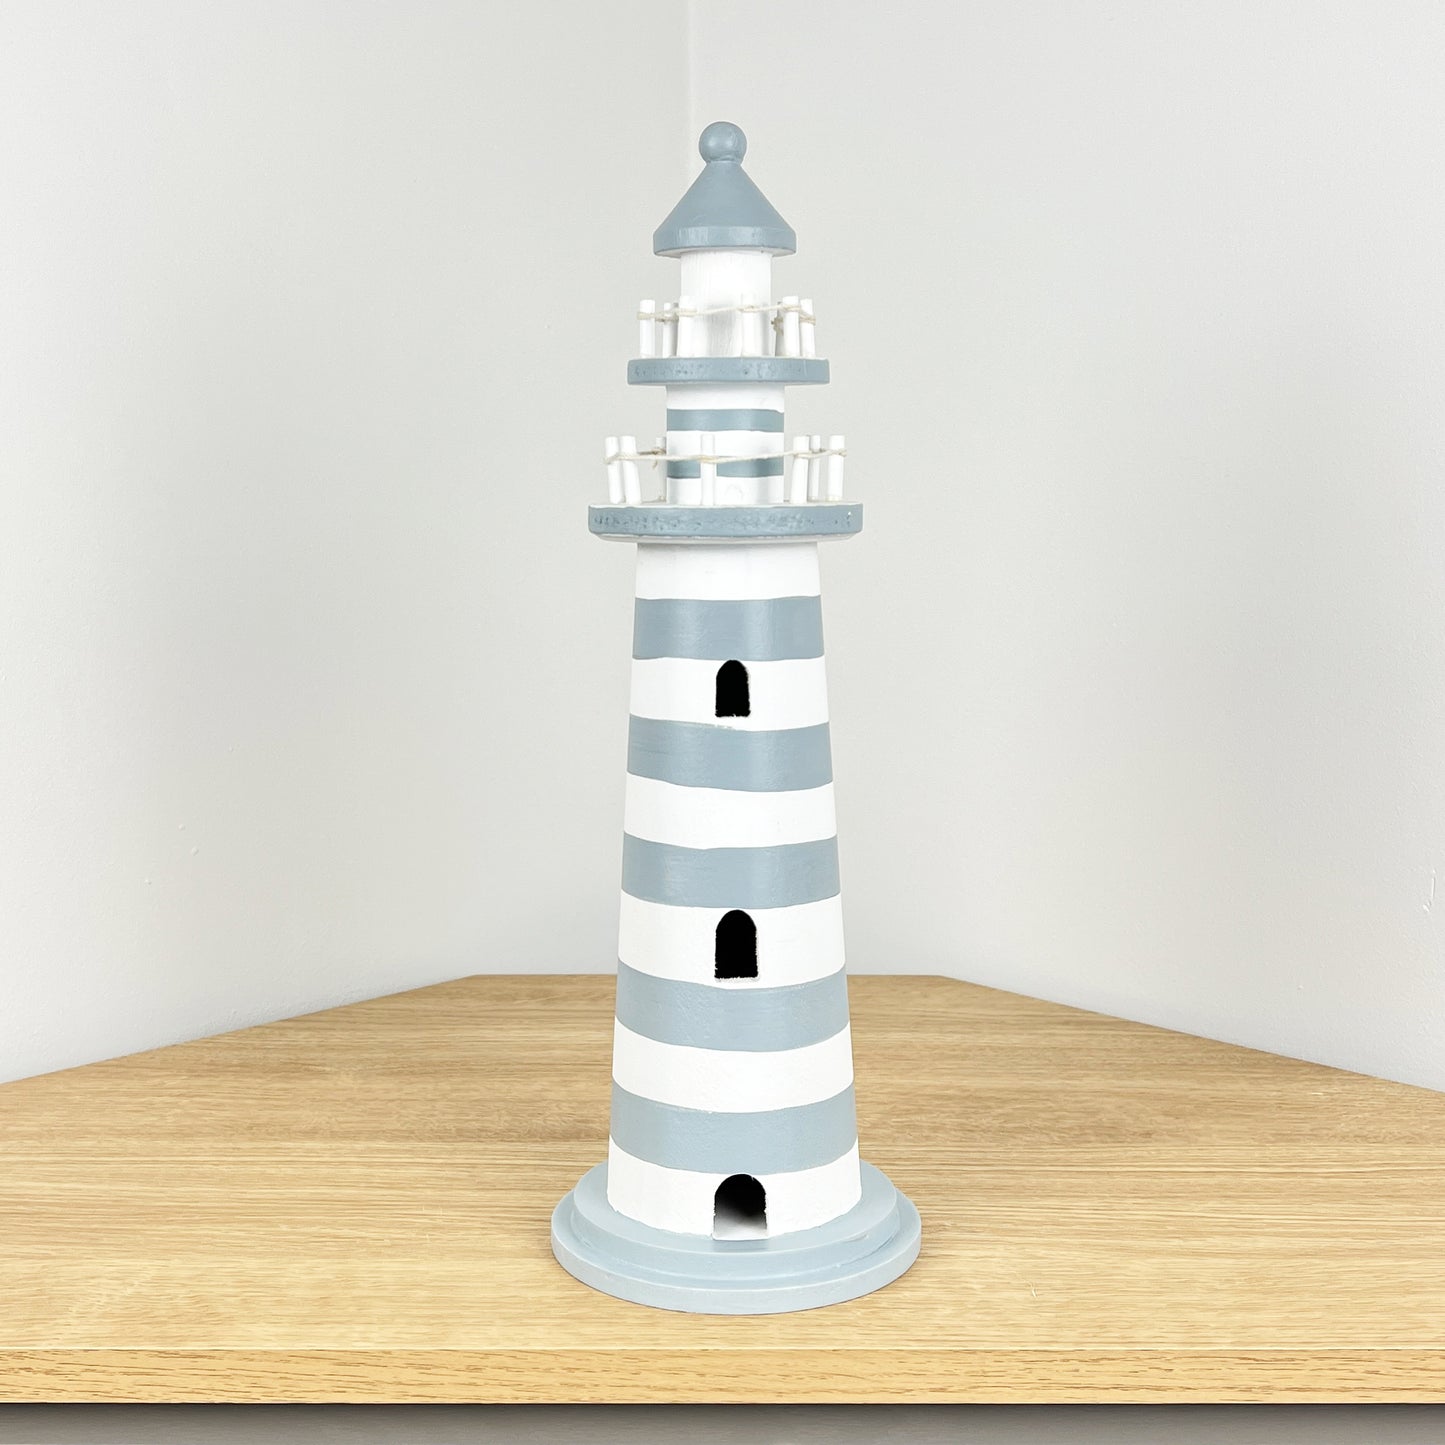 15" Wooden Lighthouse Ornament